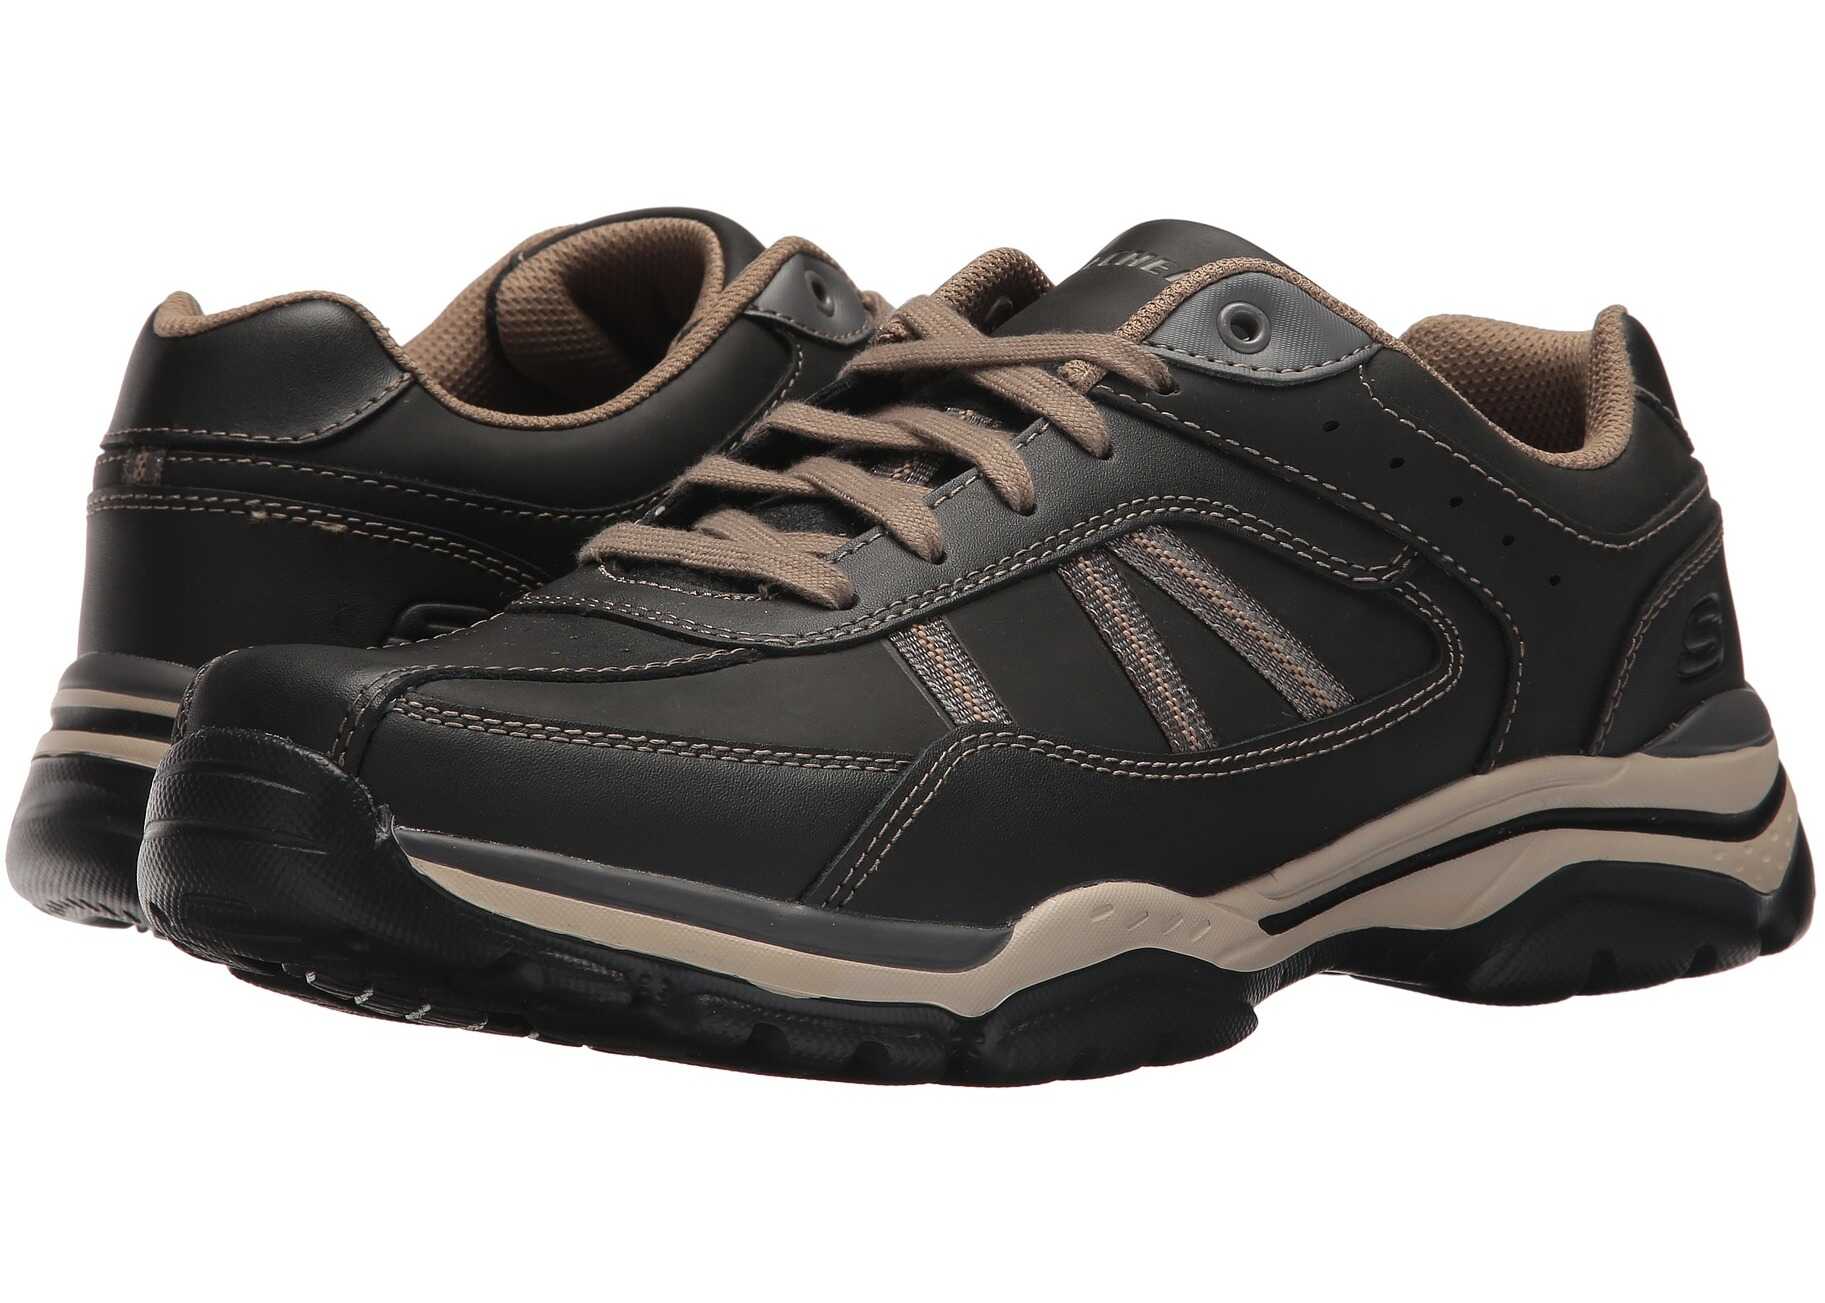 SKECHERS Relaxed Fit Rovato - Texon Black/Taupe